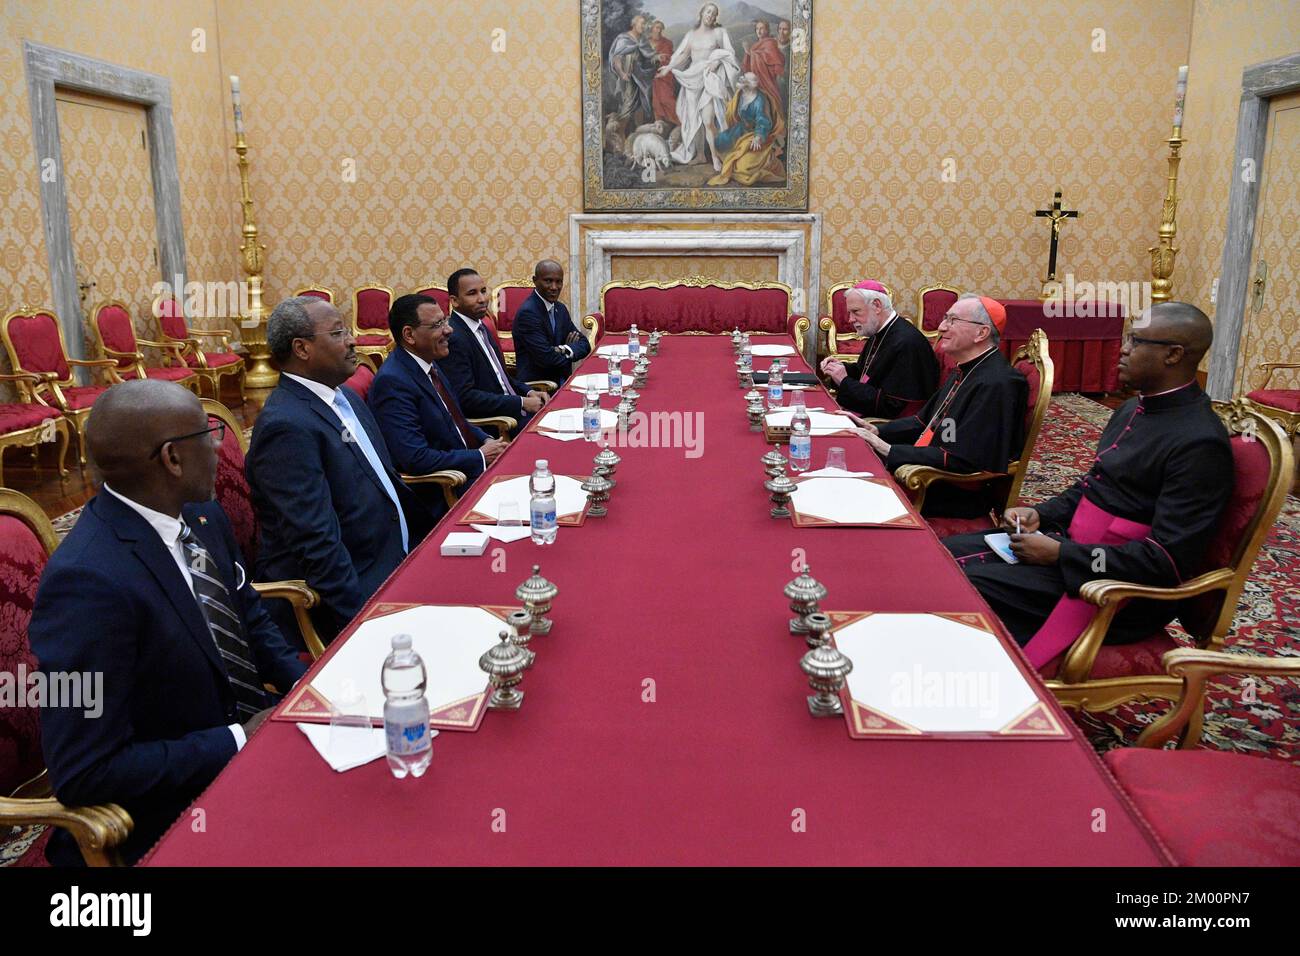 Vatican, Vatican. 03rd Dec, 2022. Italy, Rome, Vatican, 22/12/3 Cardinal Pietro Parolin receives Mr. Mohamed Bazoum, President of the Republic of Niger in private audience at Vatican Photograph byVatican Media /Catholic Press Photo. RESTRICTED TO EDITORIAL USE - NO MARKETING - NO ADVERTISING CAMPAIGNS Credit: Independent Photo Agency/Alamy Live News Stock Photo